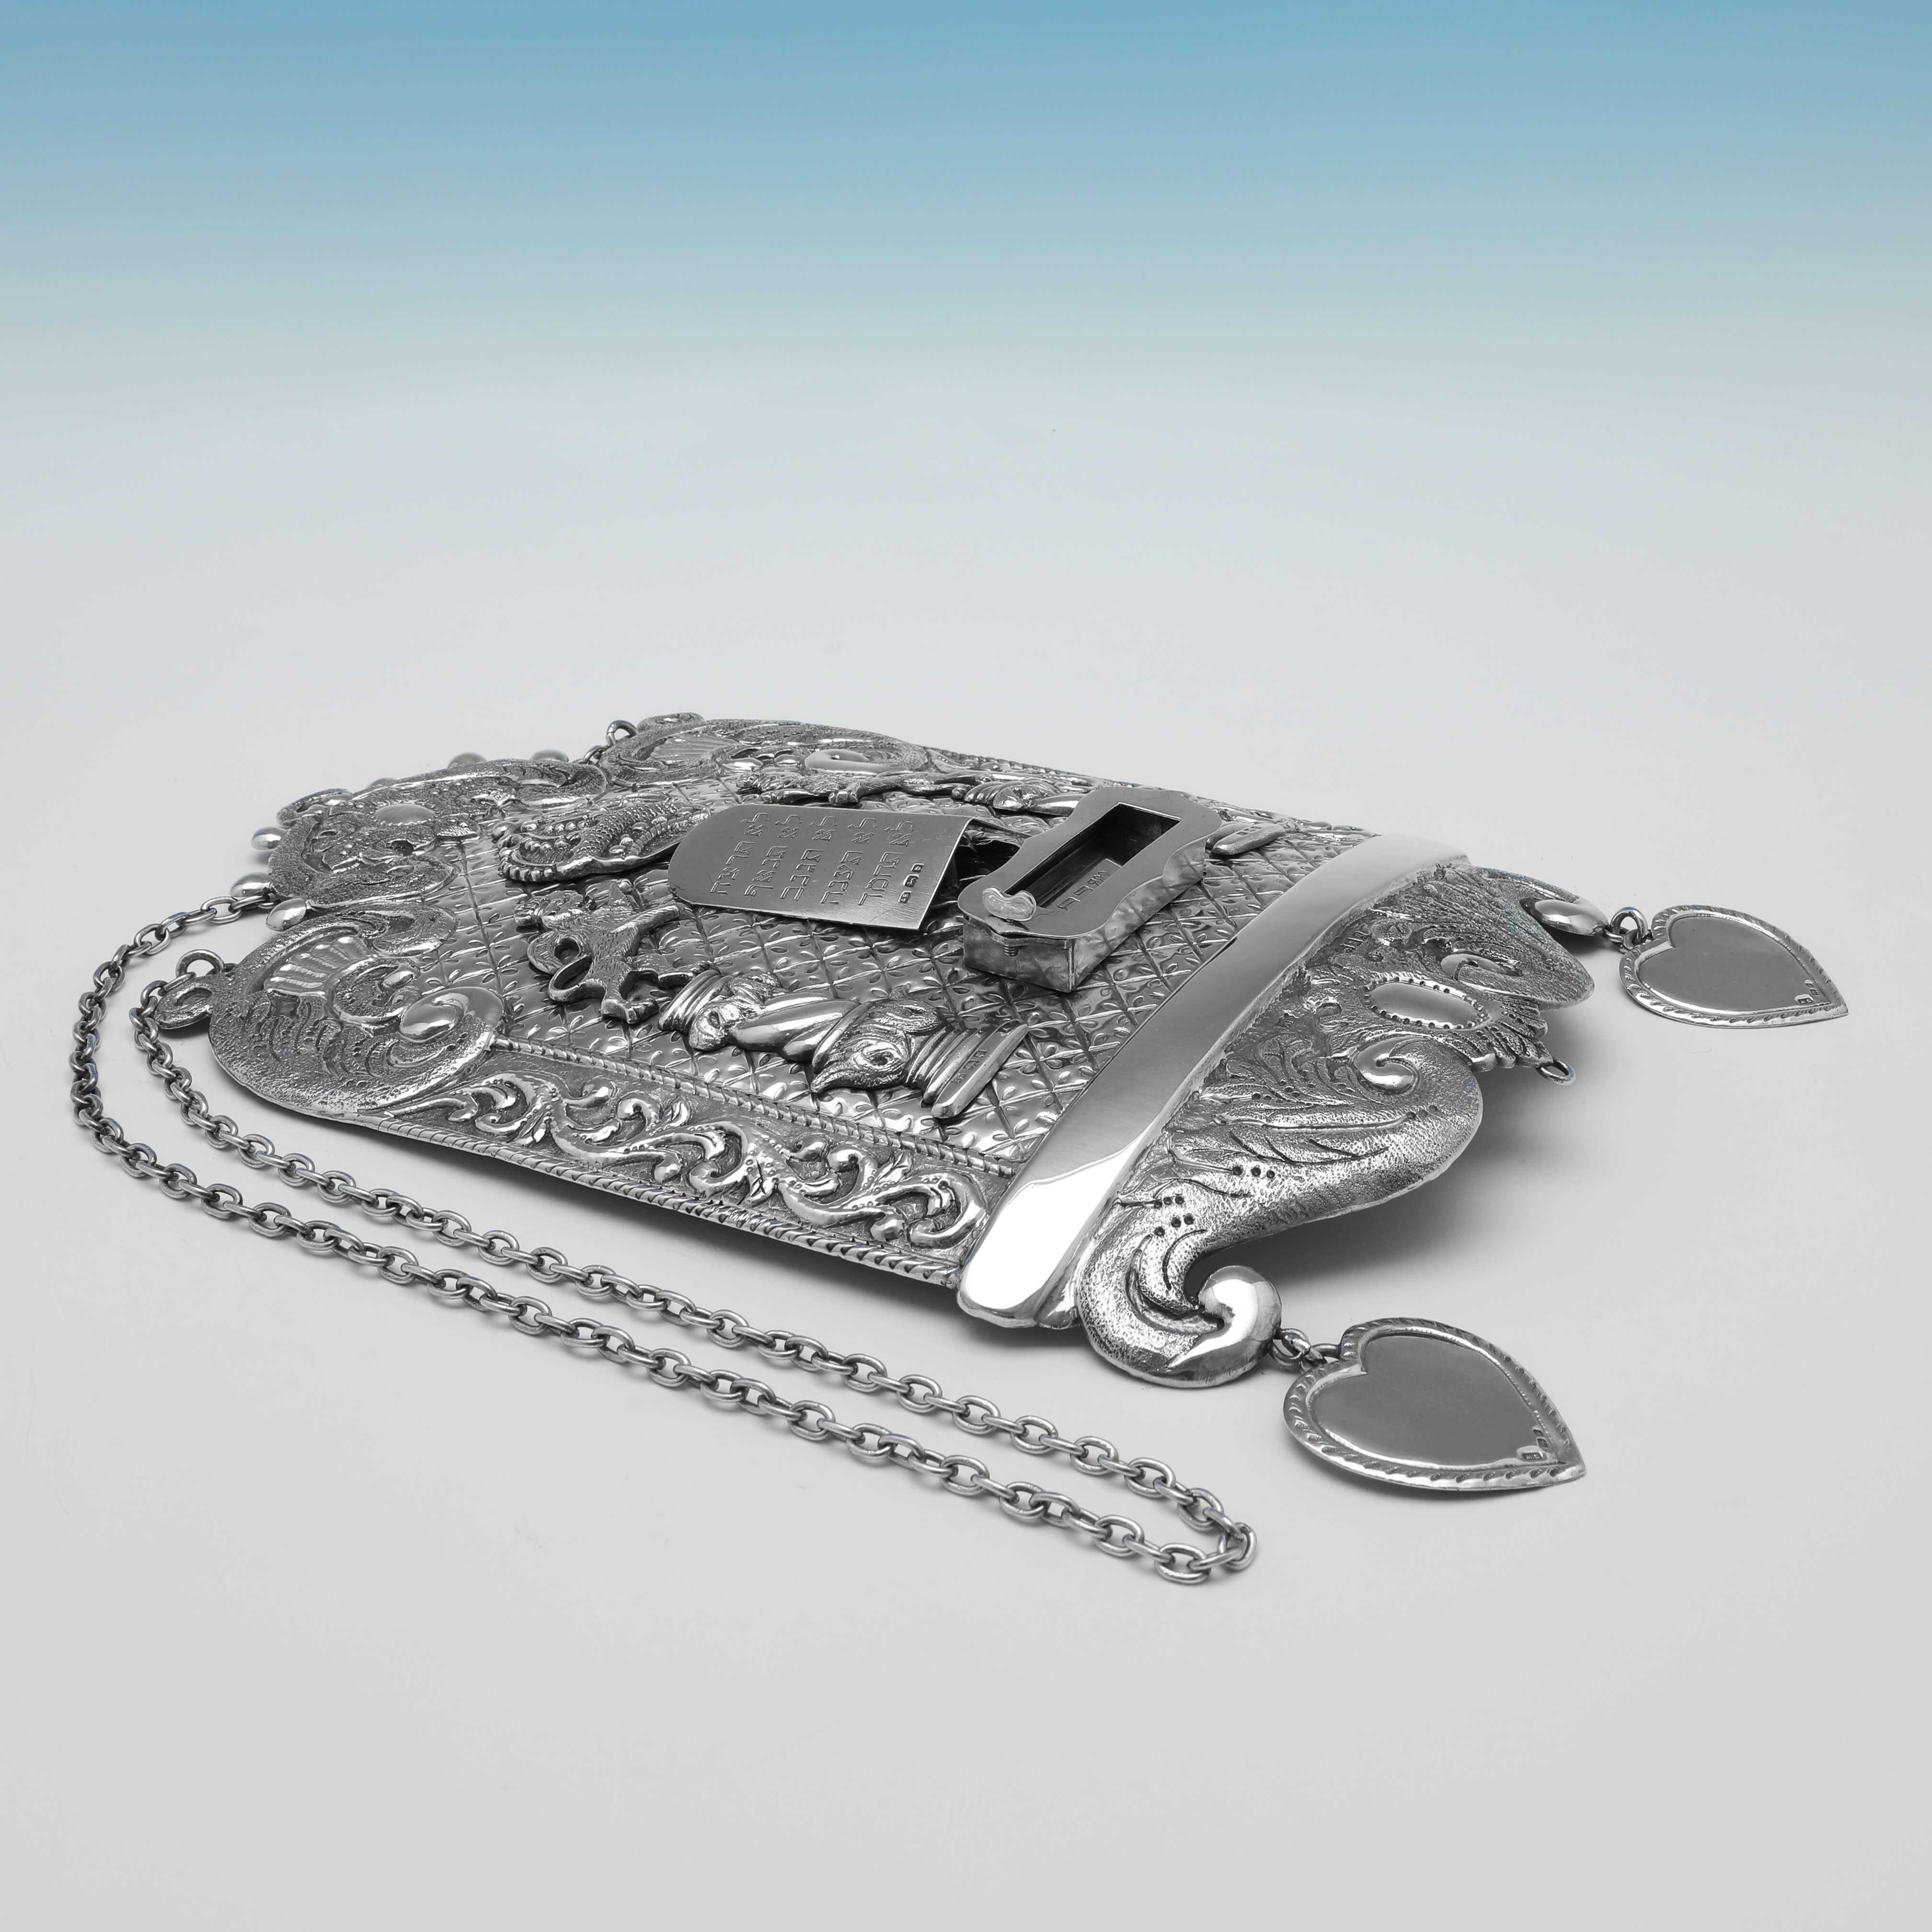 Hallmarked in London in 1922 by Arthur Bowe, this wonderfully detailed, Sterling Silver Breastplate, features decoration depiction the tablets with the engraved Ten Commandments in Hebrew, two columns representing the columns of the Temple of